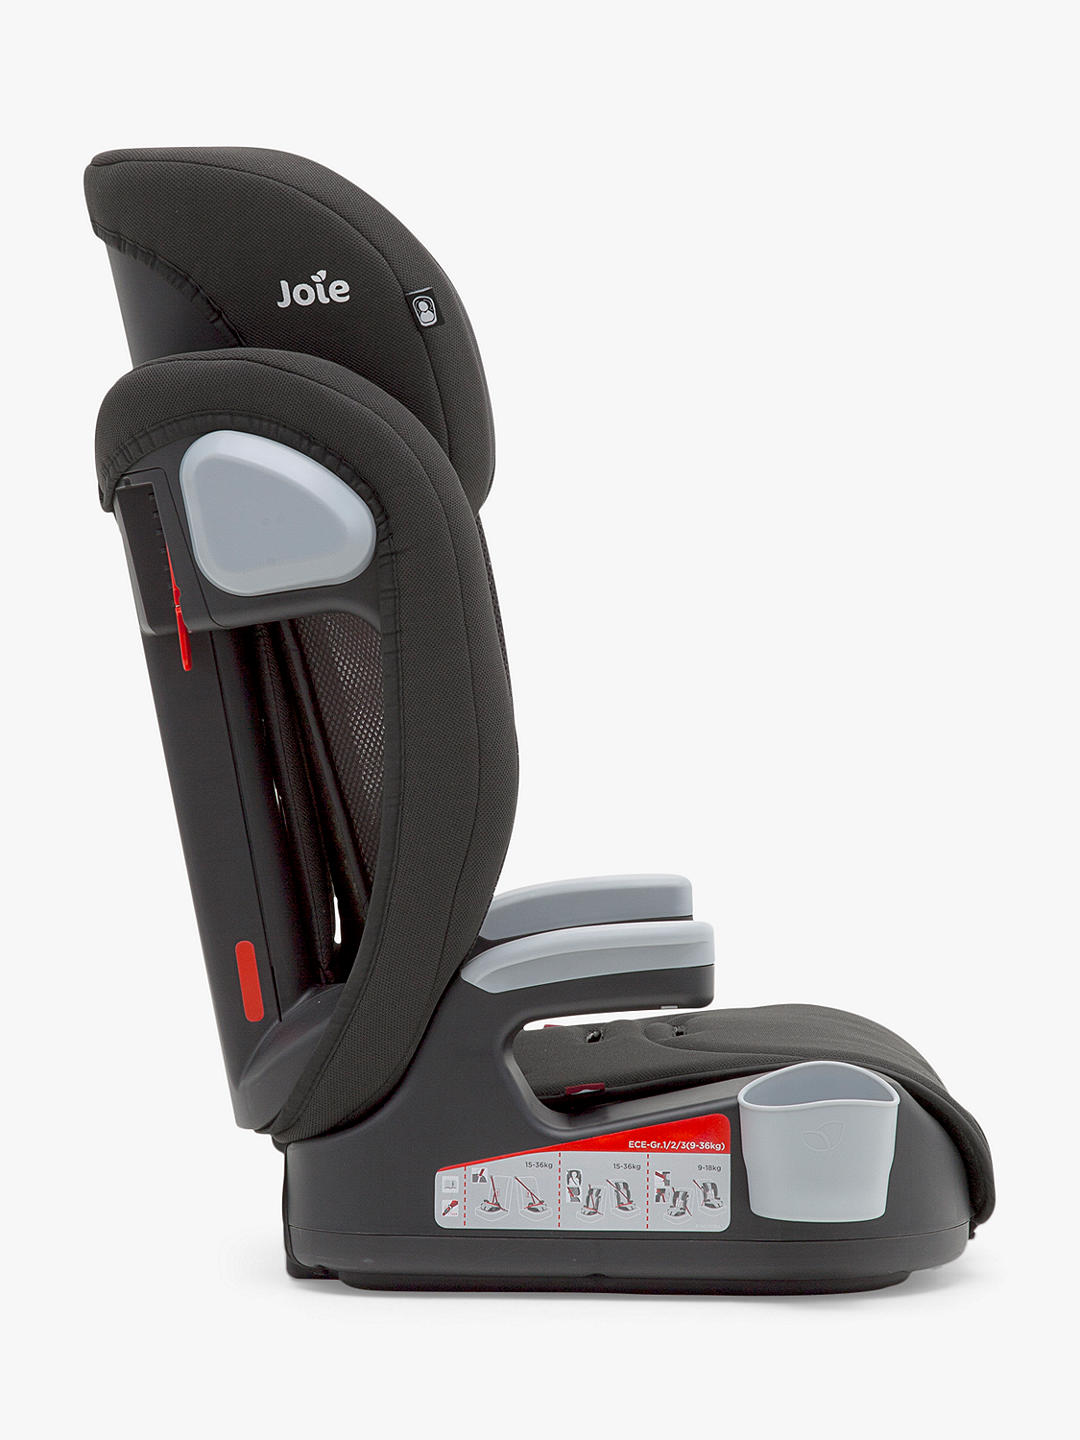 Joie Baby Elevate Group 1/2/3 Child Car Seat